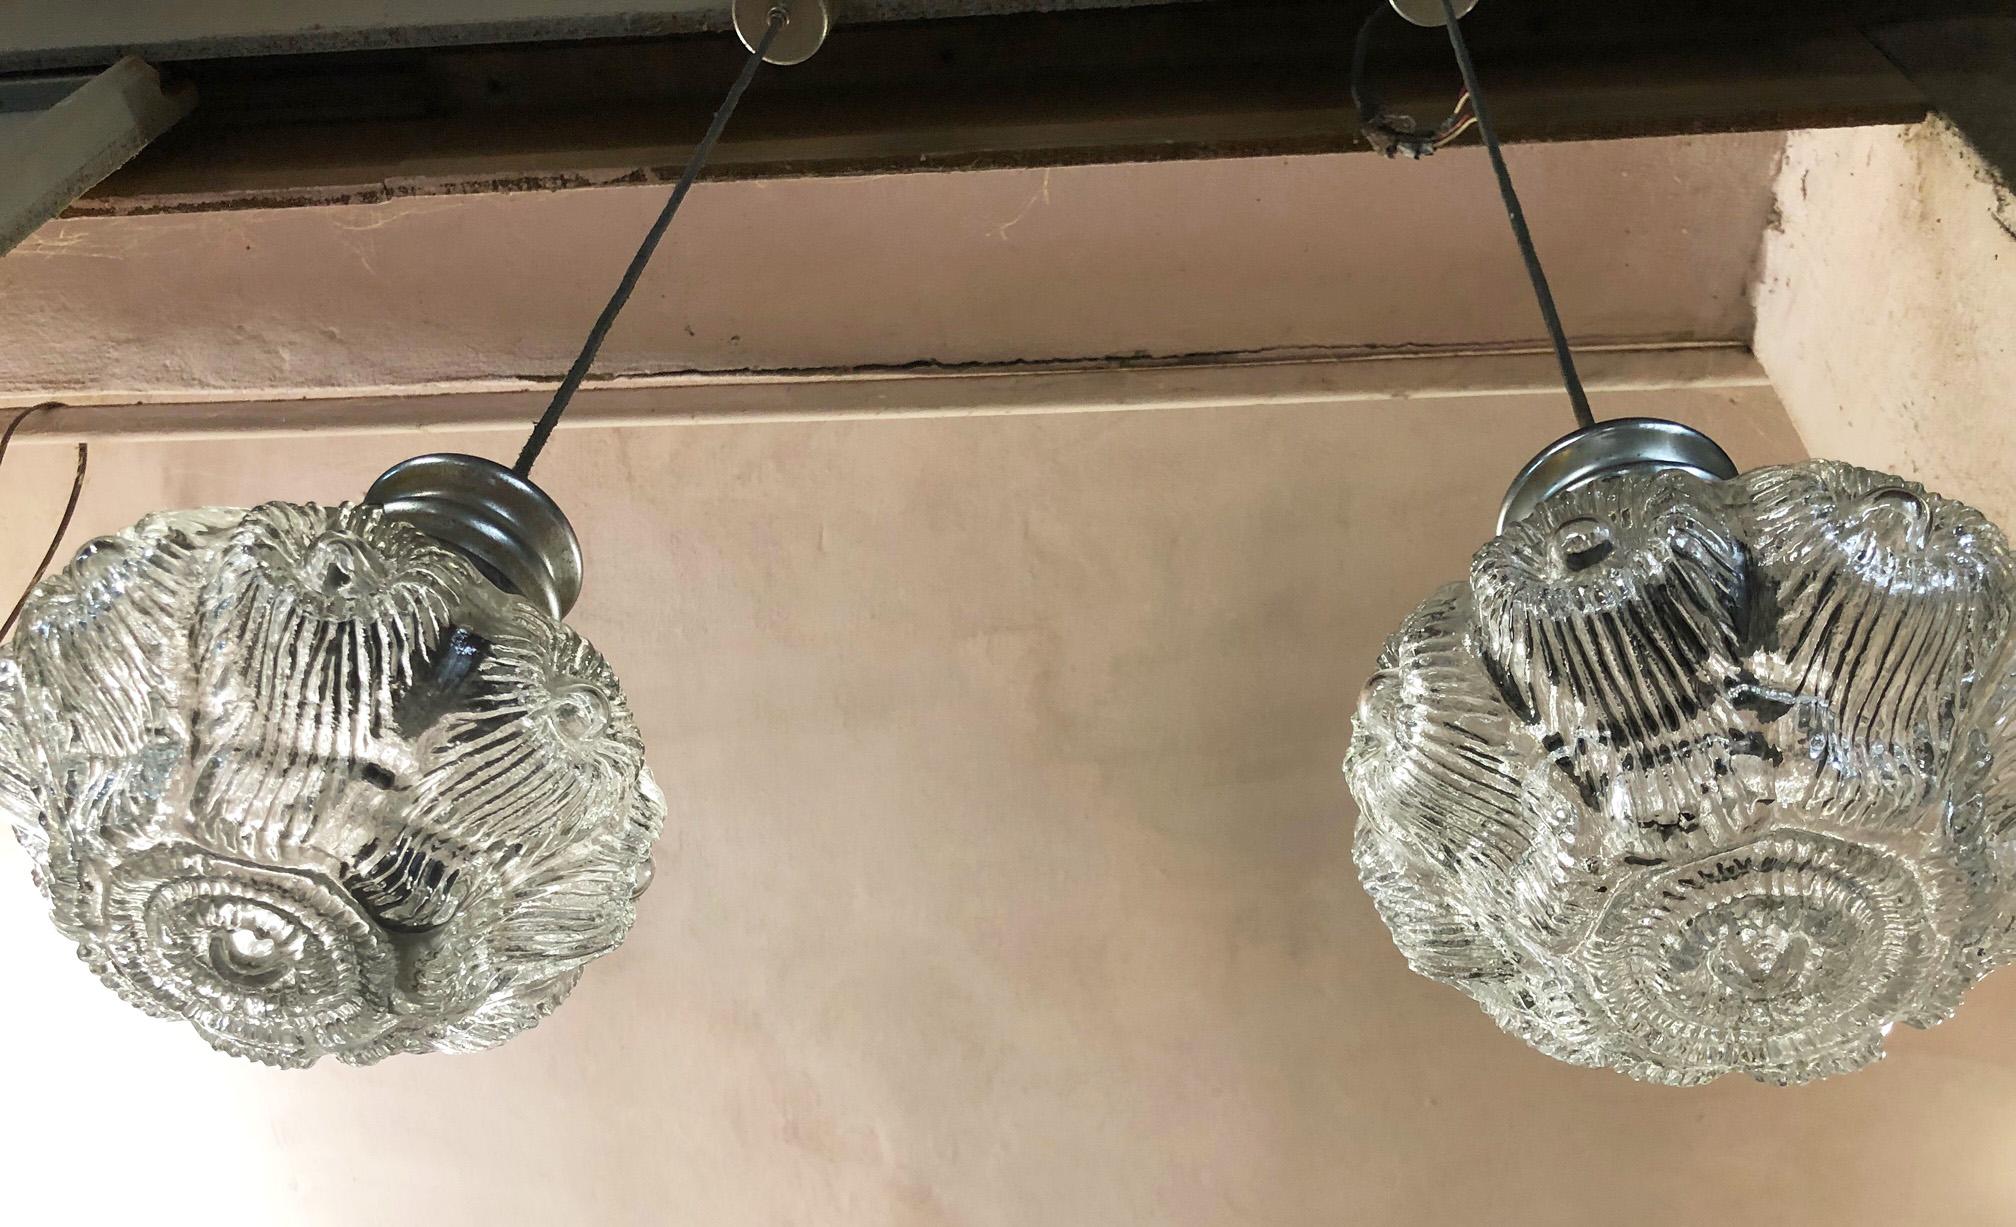 Pair of original 1960s chandeliers with a very beautiful floral-shaped glass and chromed attachments.
The total height is 90 cm.
Comes from an old country house in Lucca area of Tuscany.
The paint is original in patina.
As shown in the